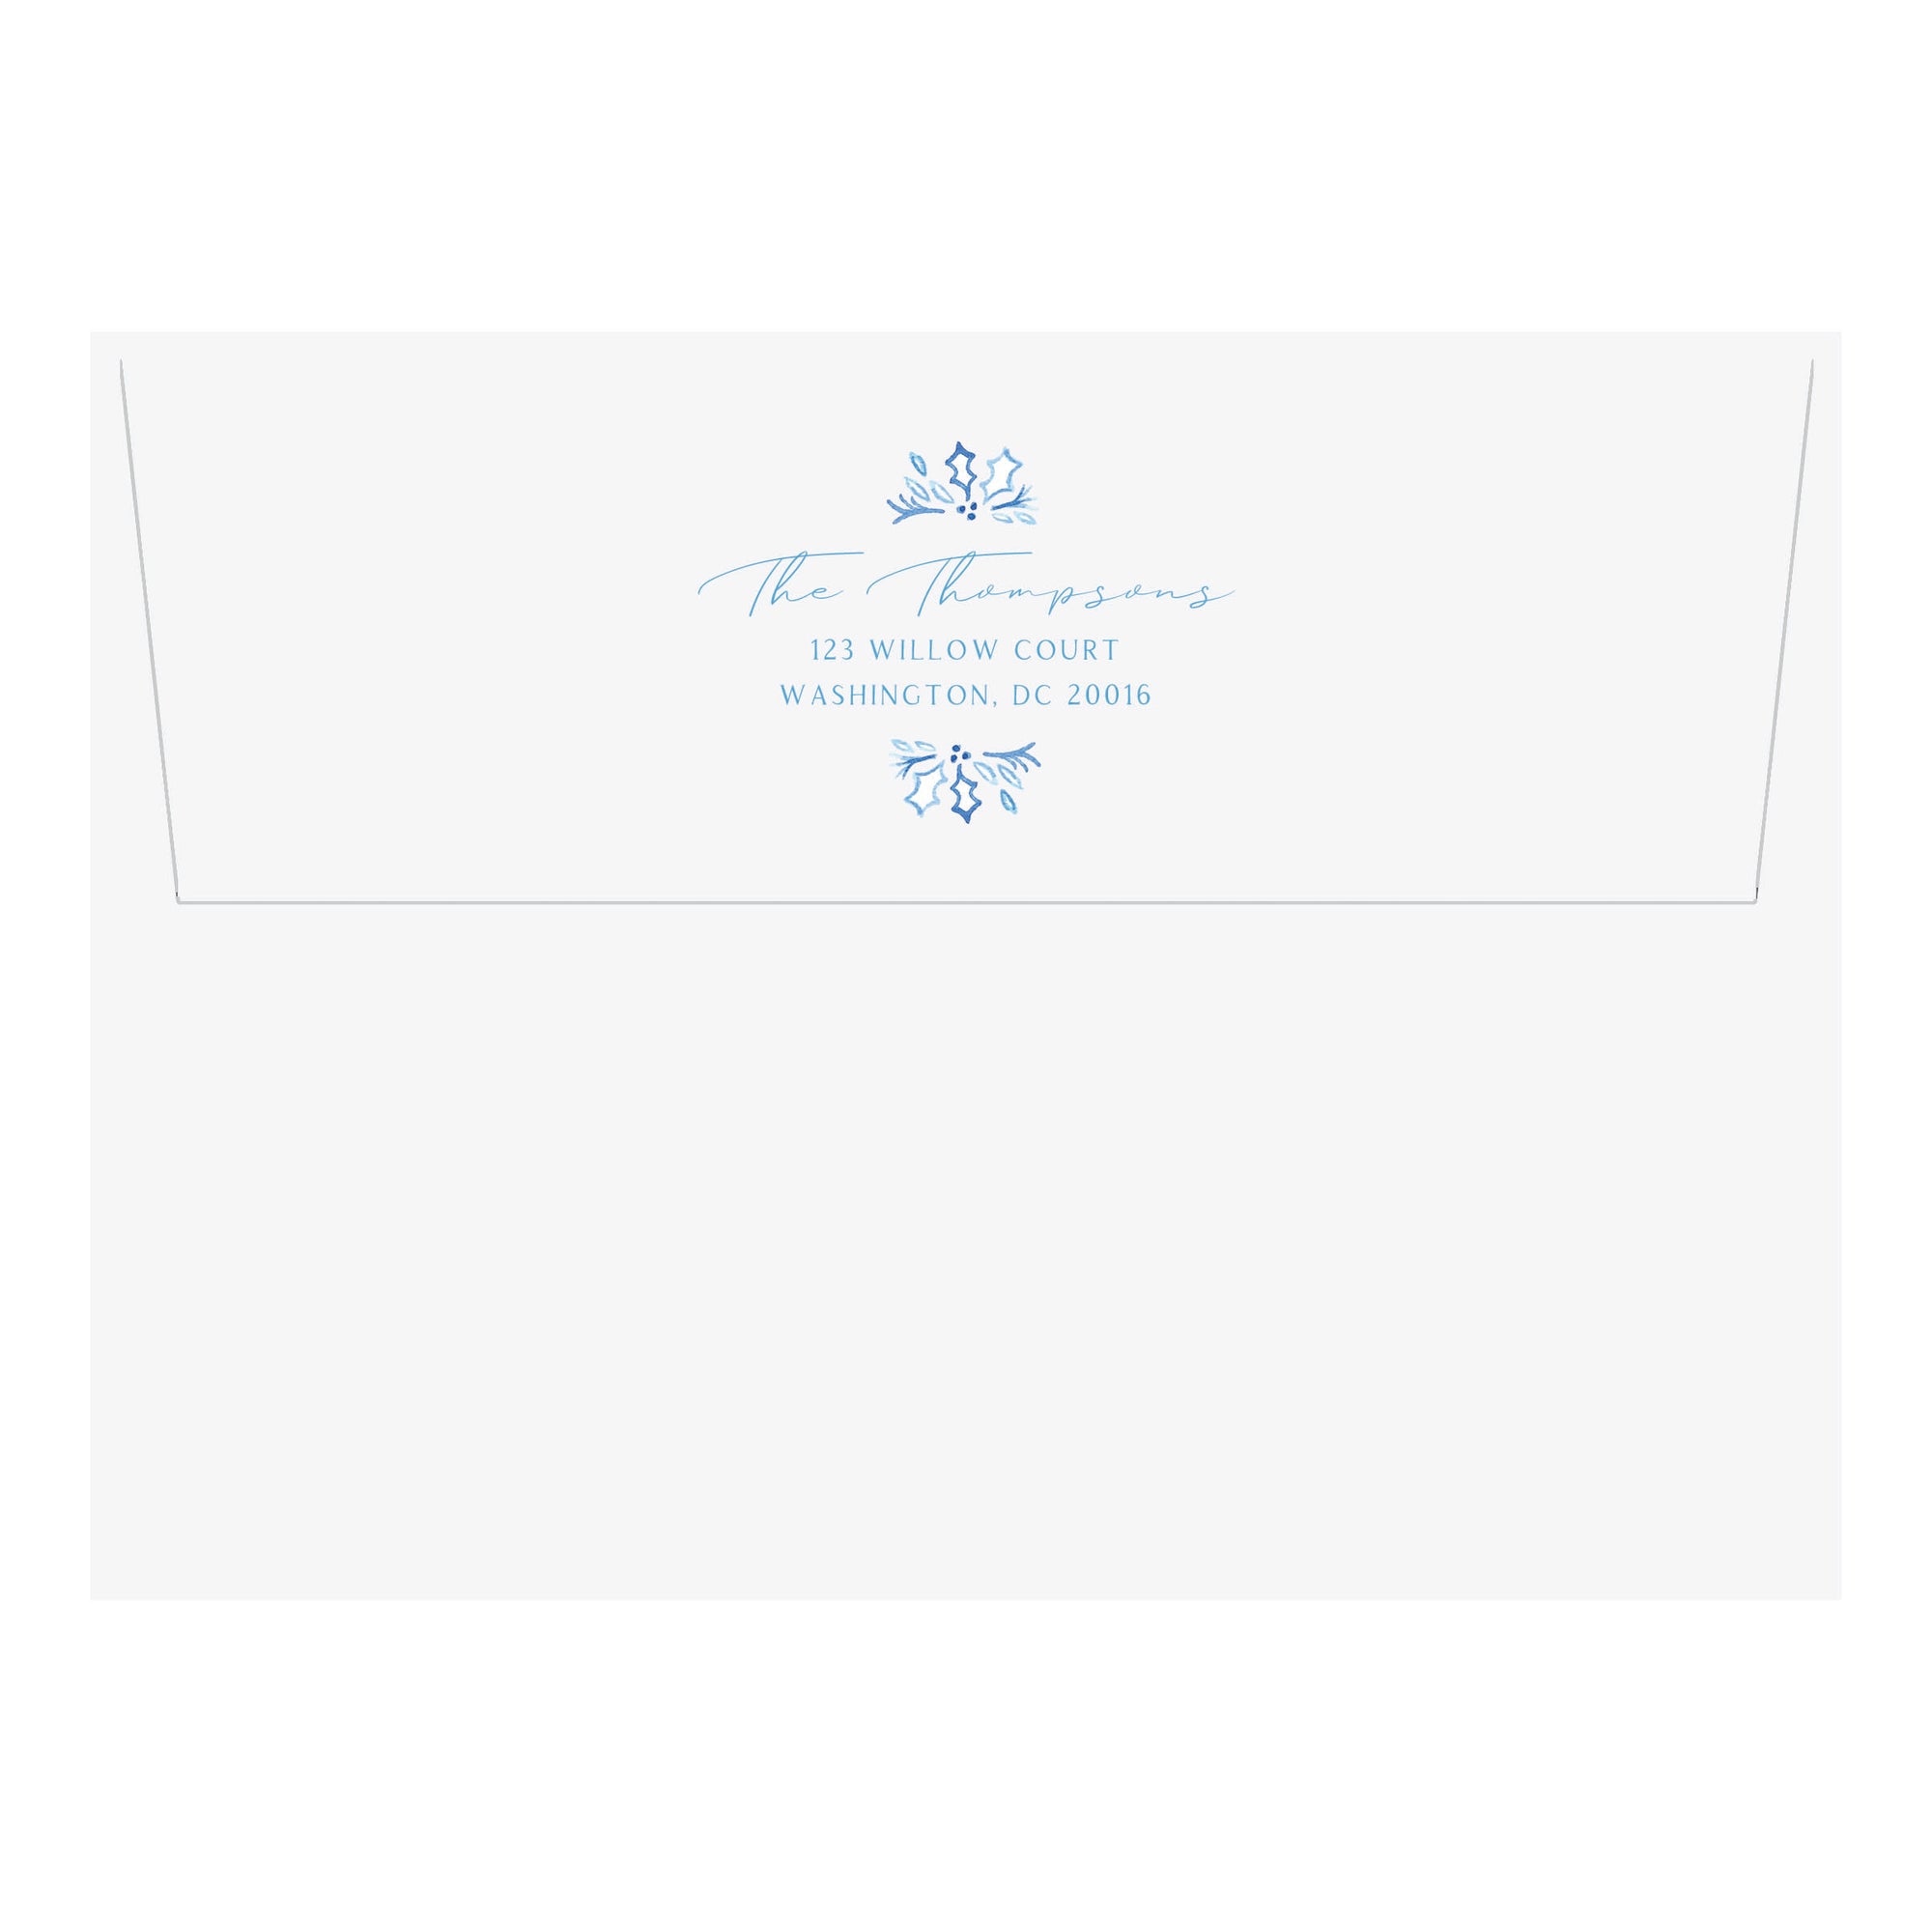 Return Address Envelopes for Holiday Photo Cards & Invitaitons